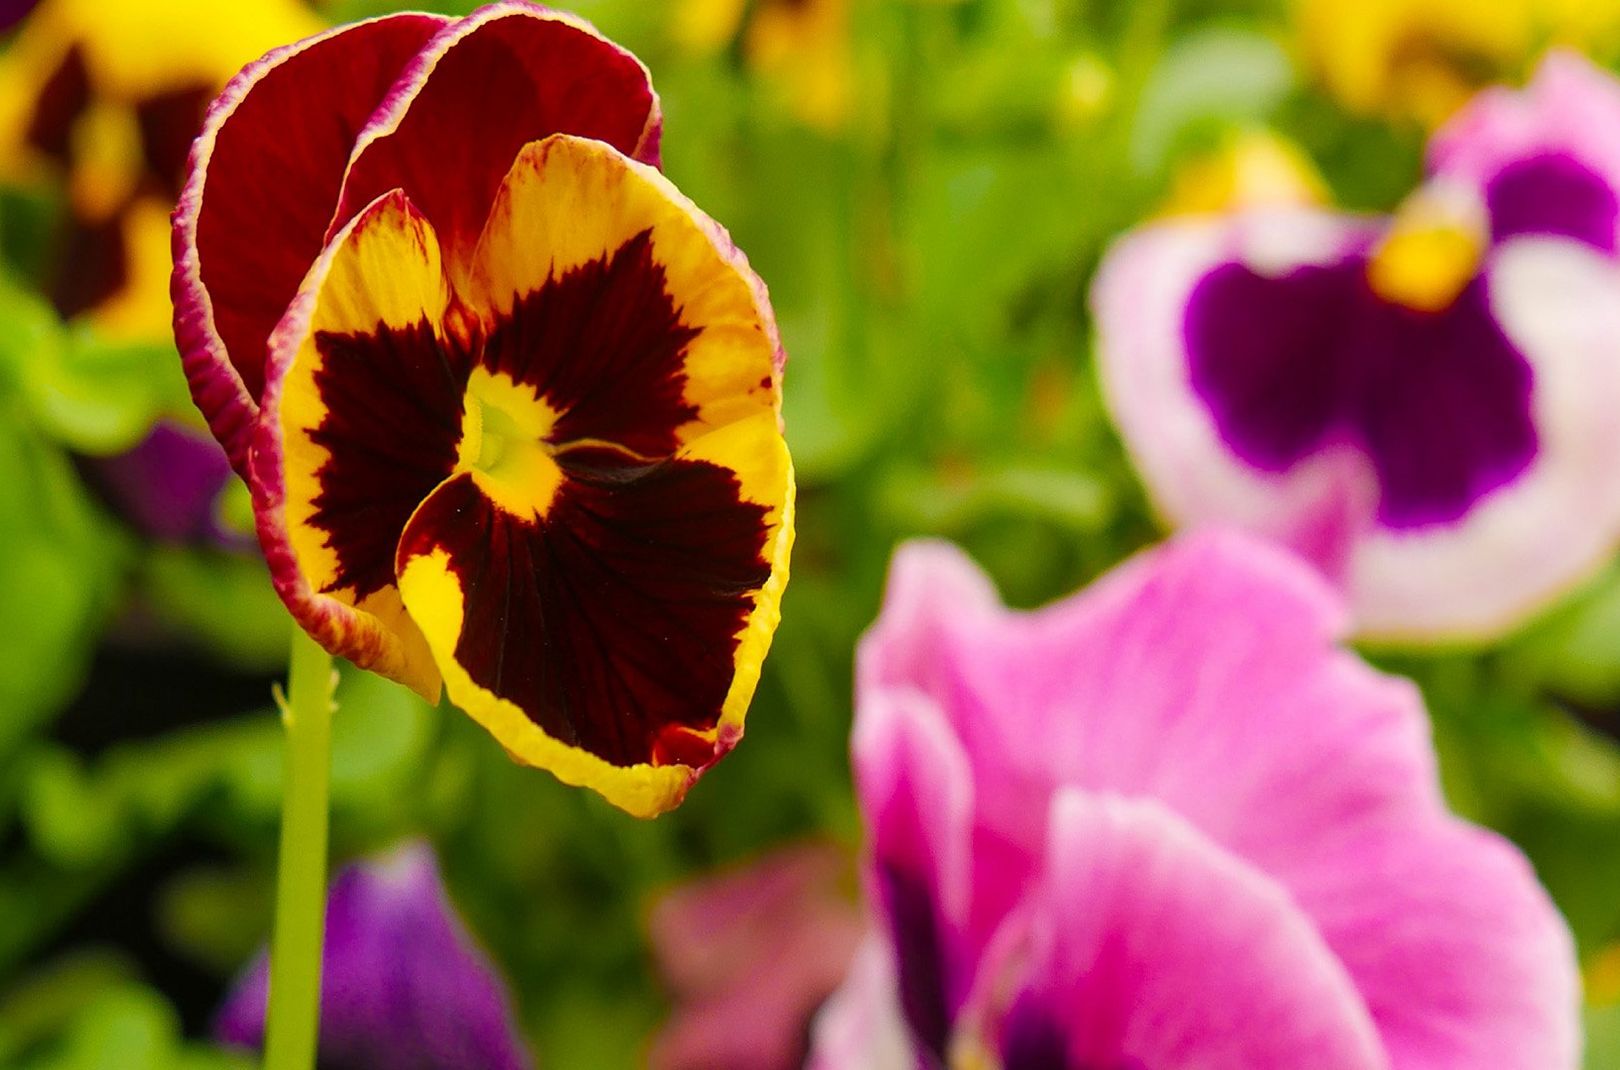 A picture of pansies